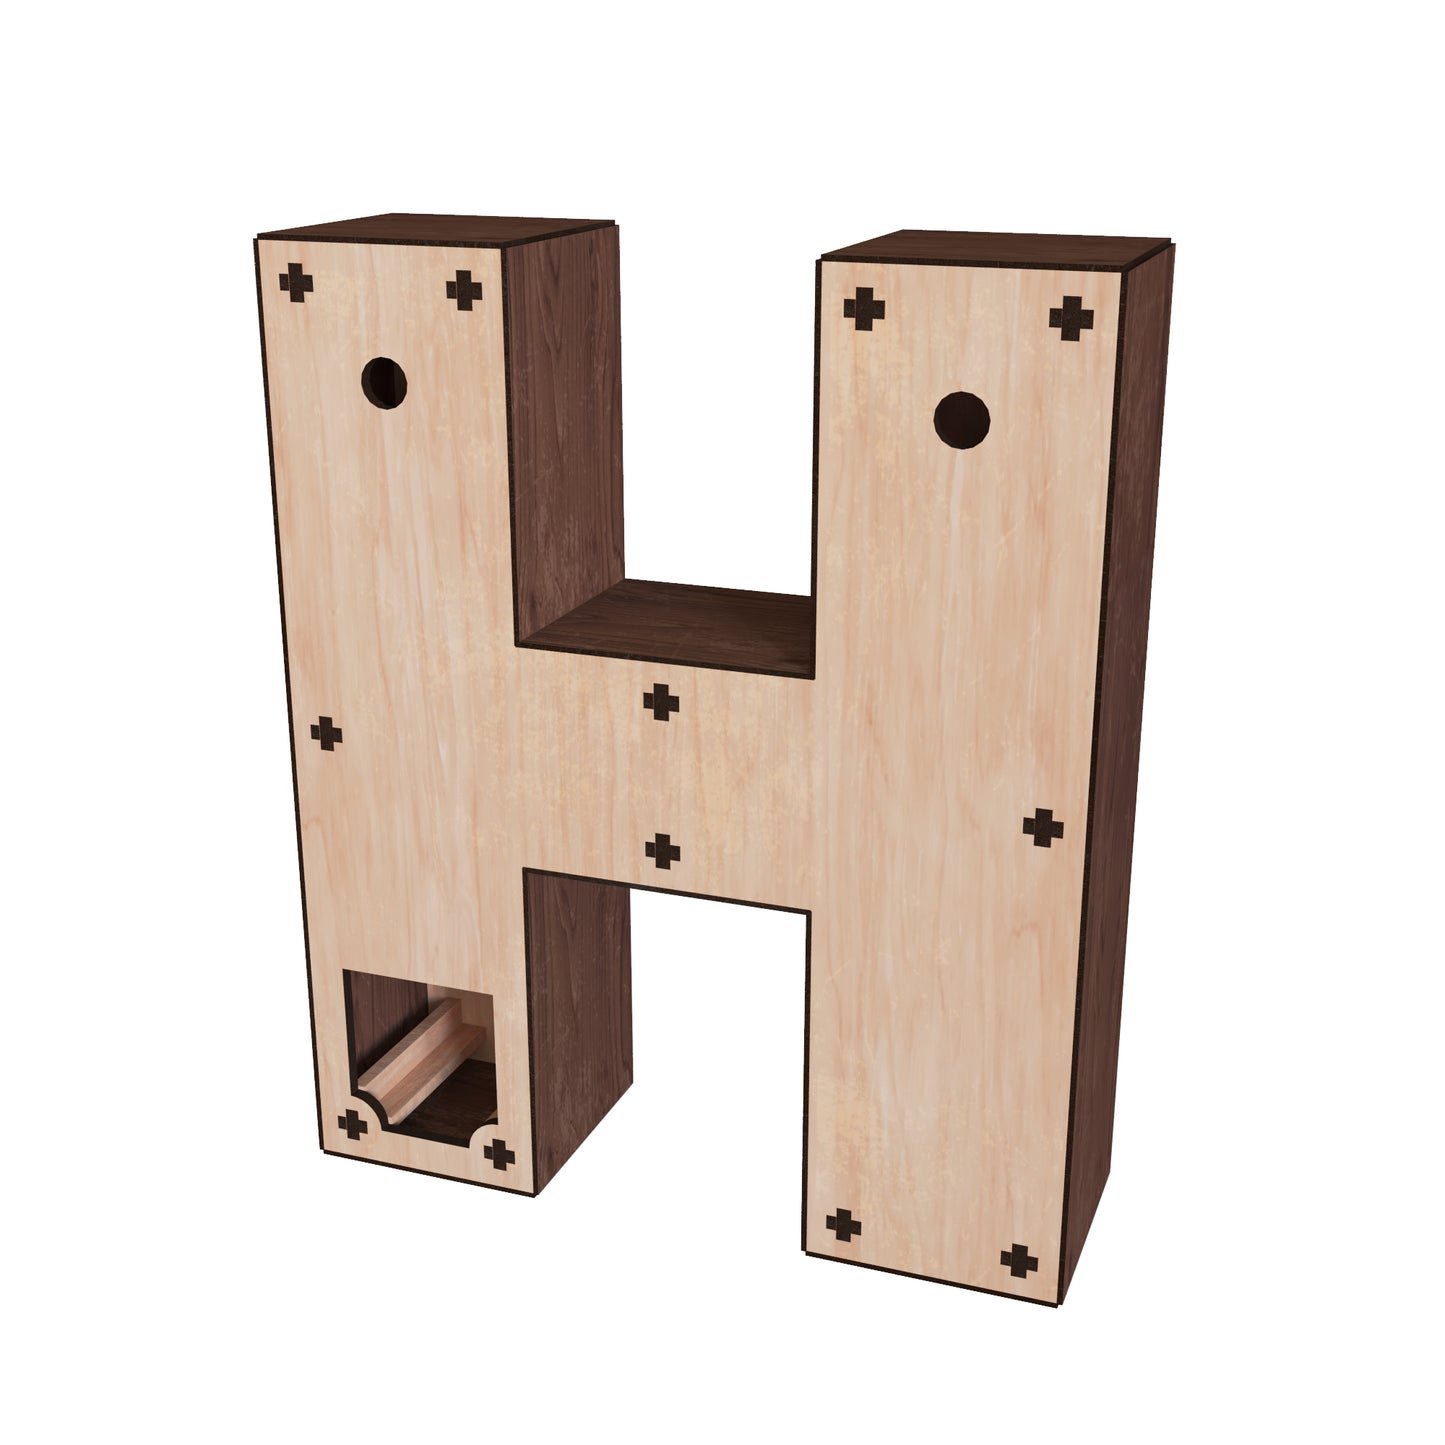 Light-up Marquee Letter Display "H"